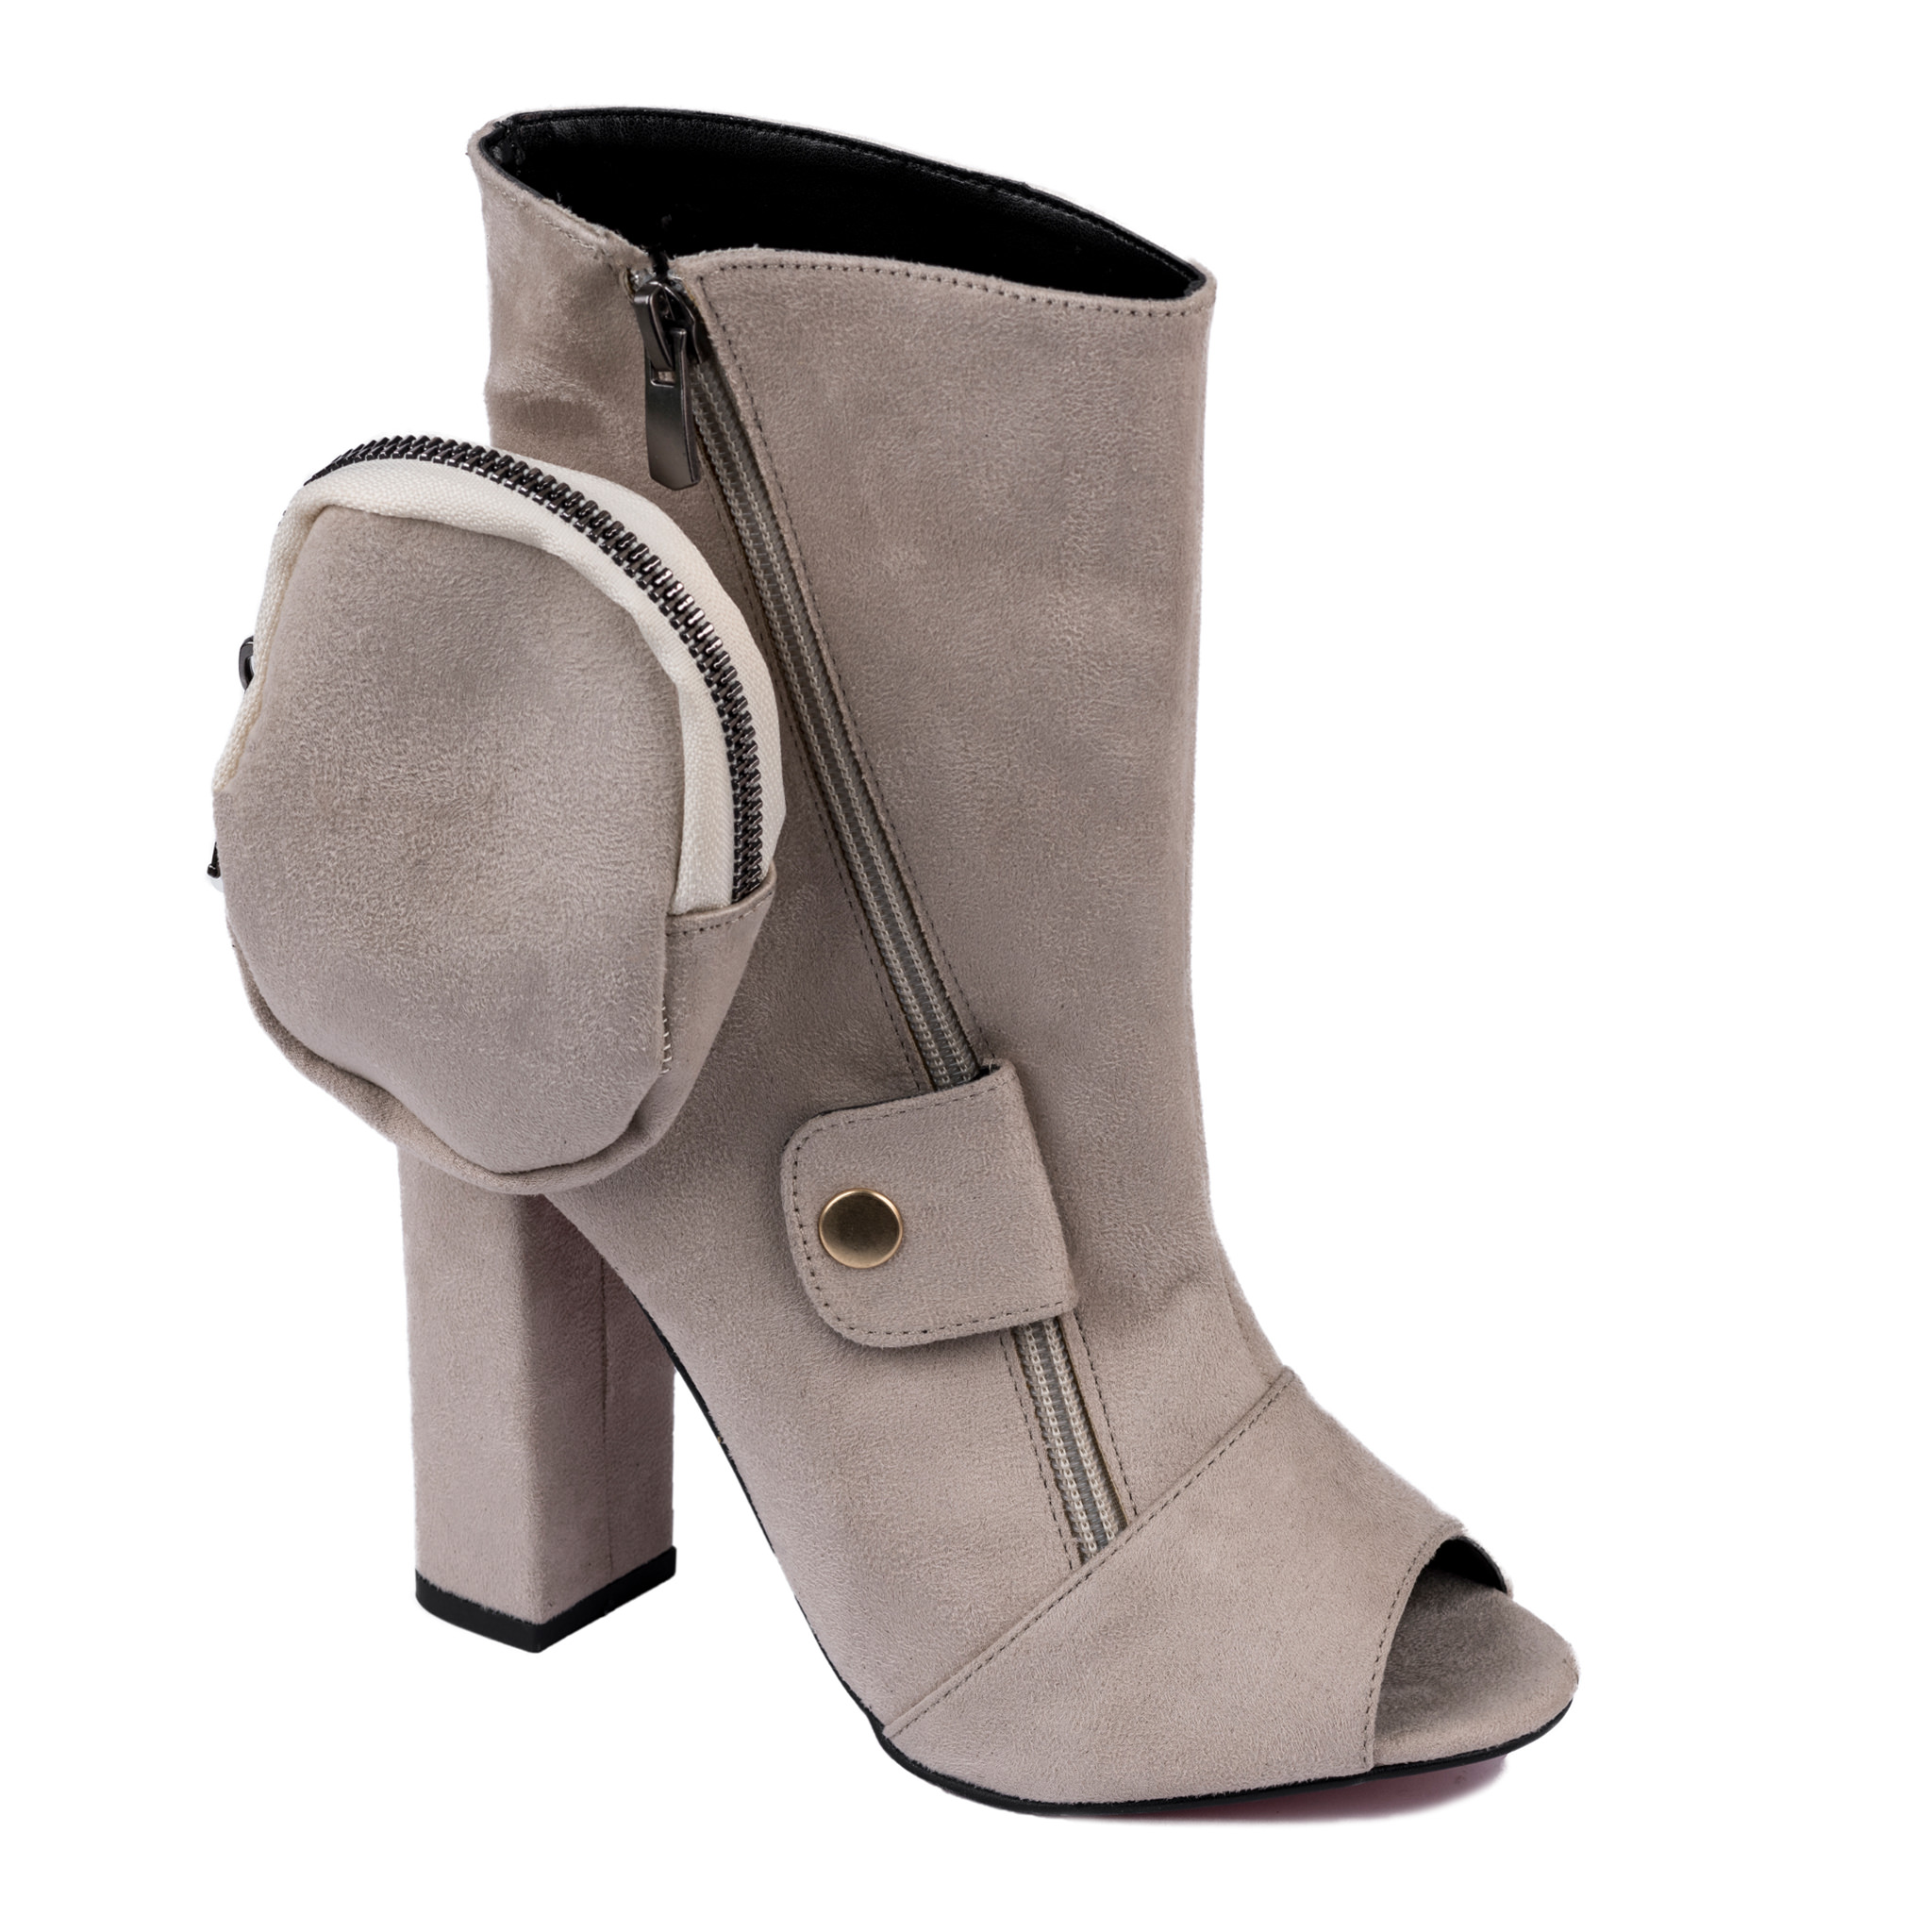 VELOUR OPEN TOE ANKLE BOOTS WITH ZIPPER - BEIGE